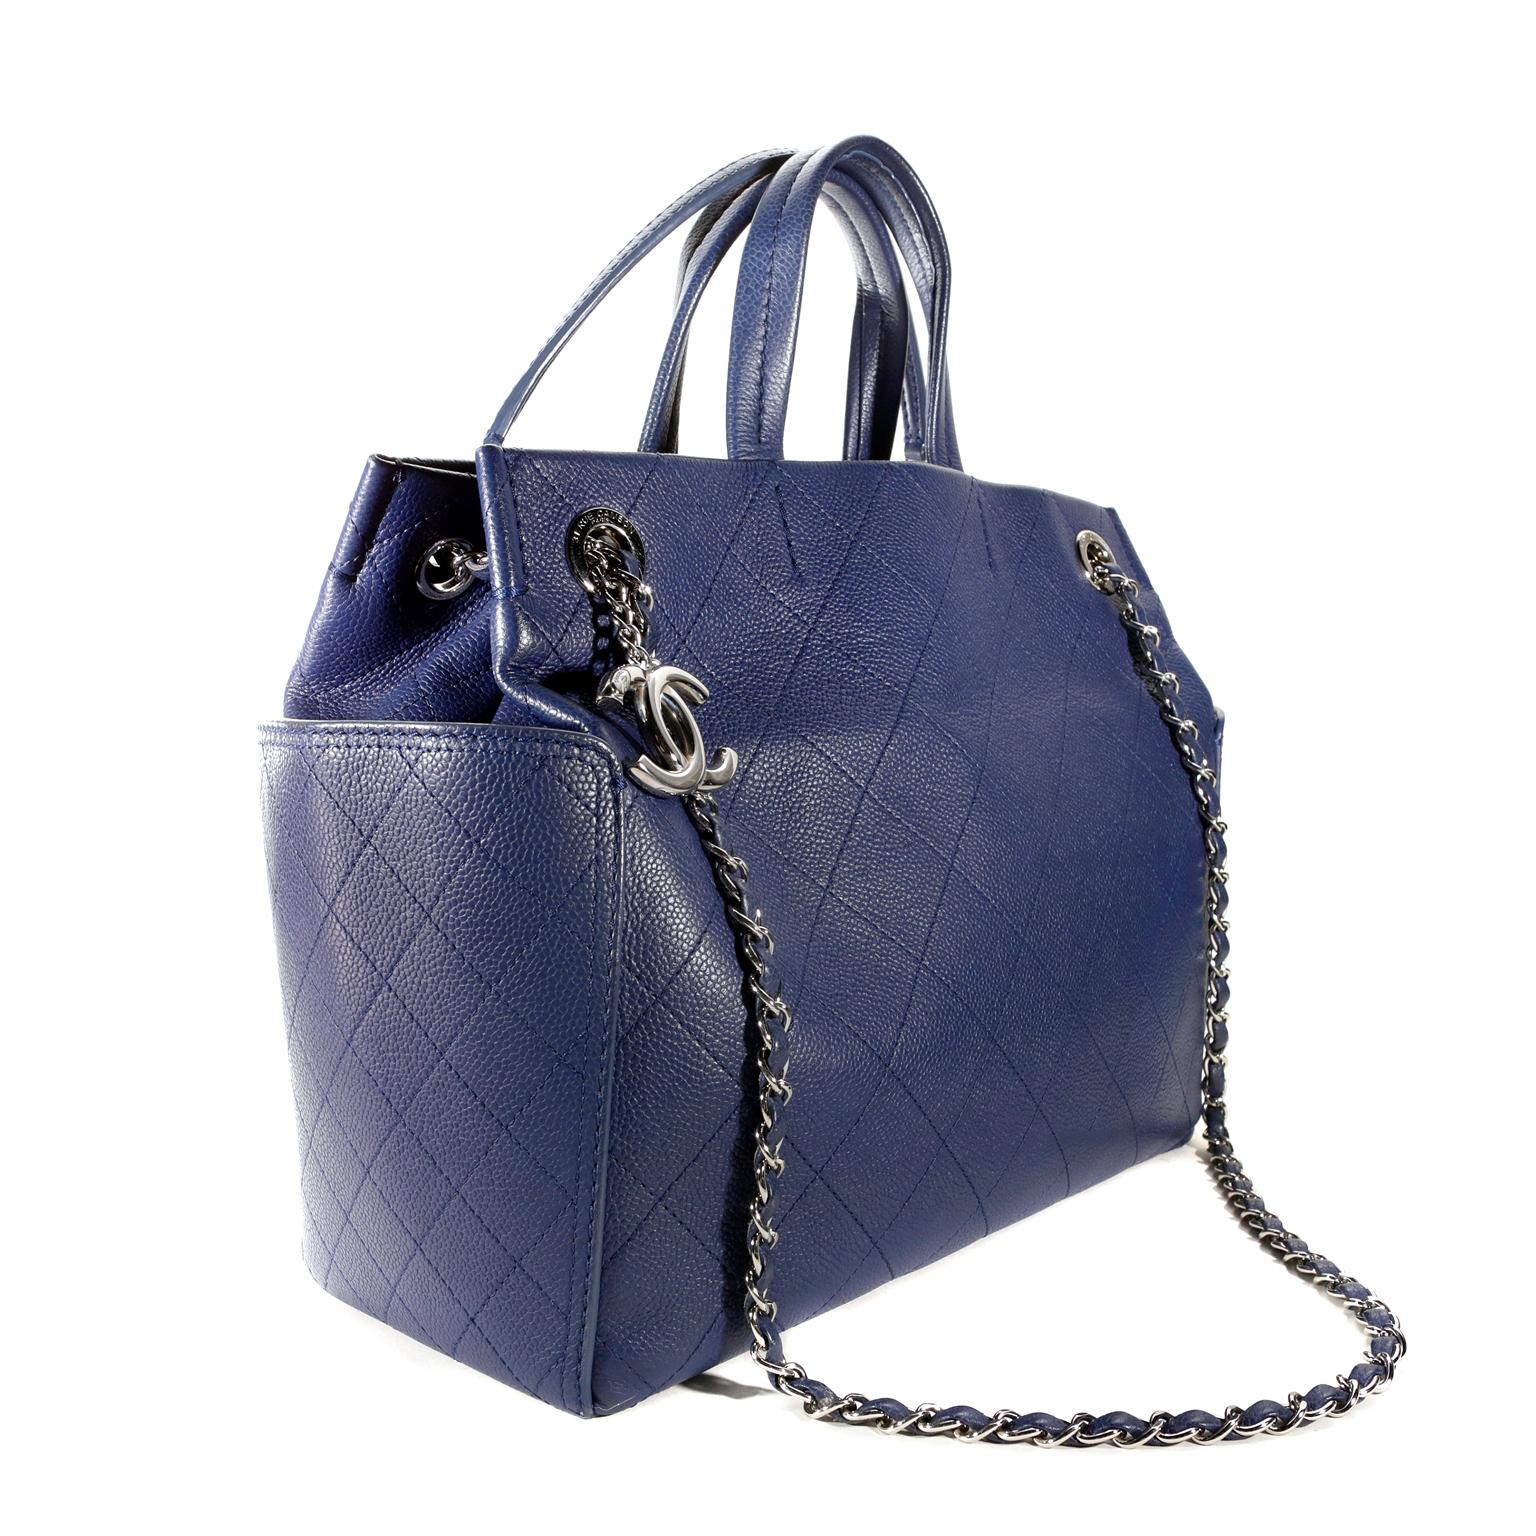  Chanel Blue Caviar Tote -  pristine condition
Carried by the short handles or the long chain, it is a versatile piece perfect for daily enjoyment. 
Marine blue caviar leather is textured and durable.  Signature Chanel diamond stitched pattern with